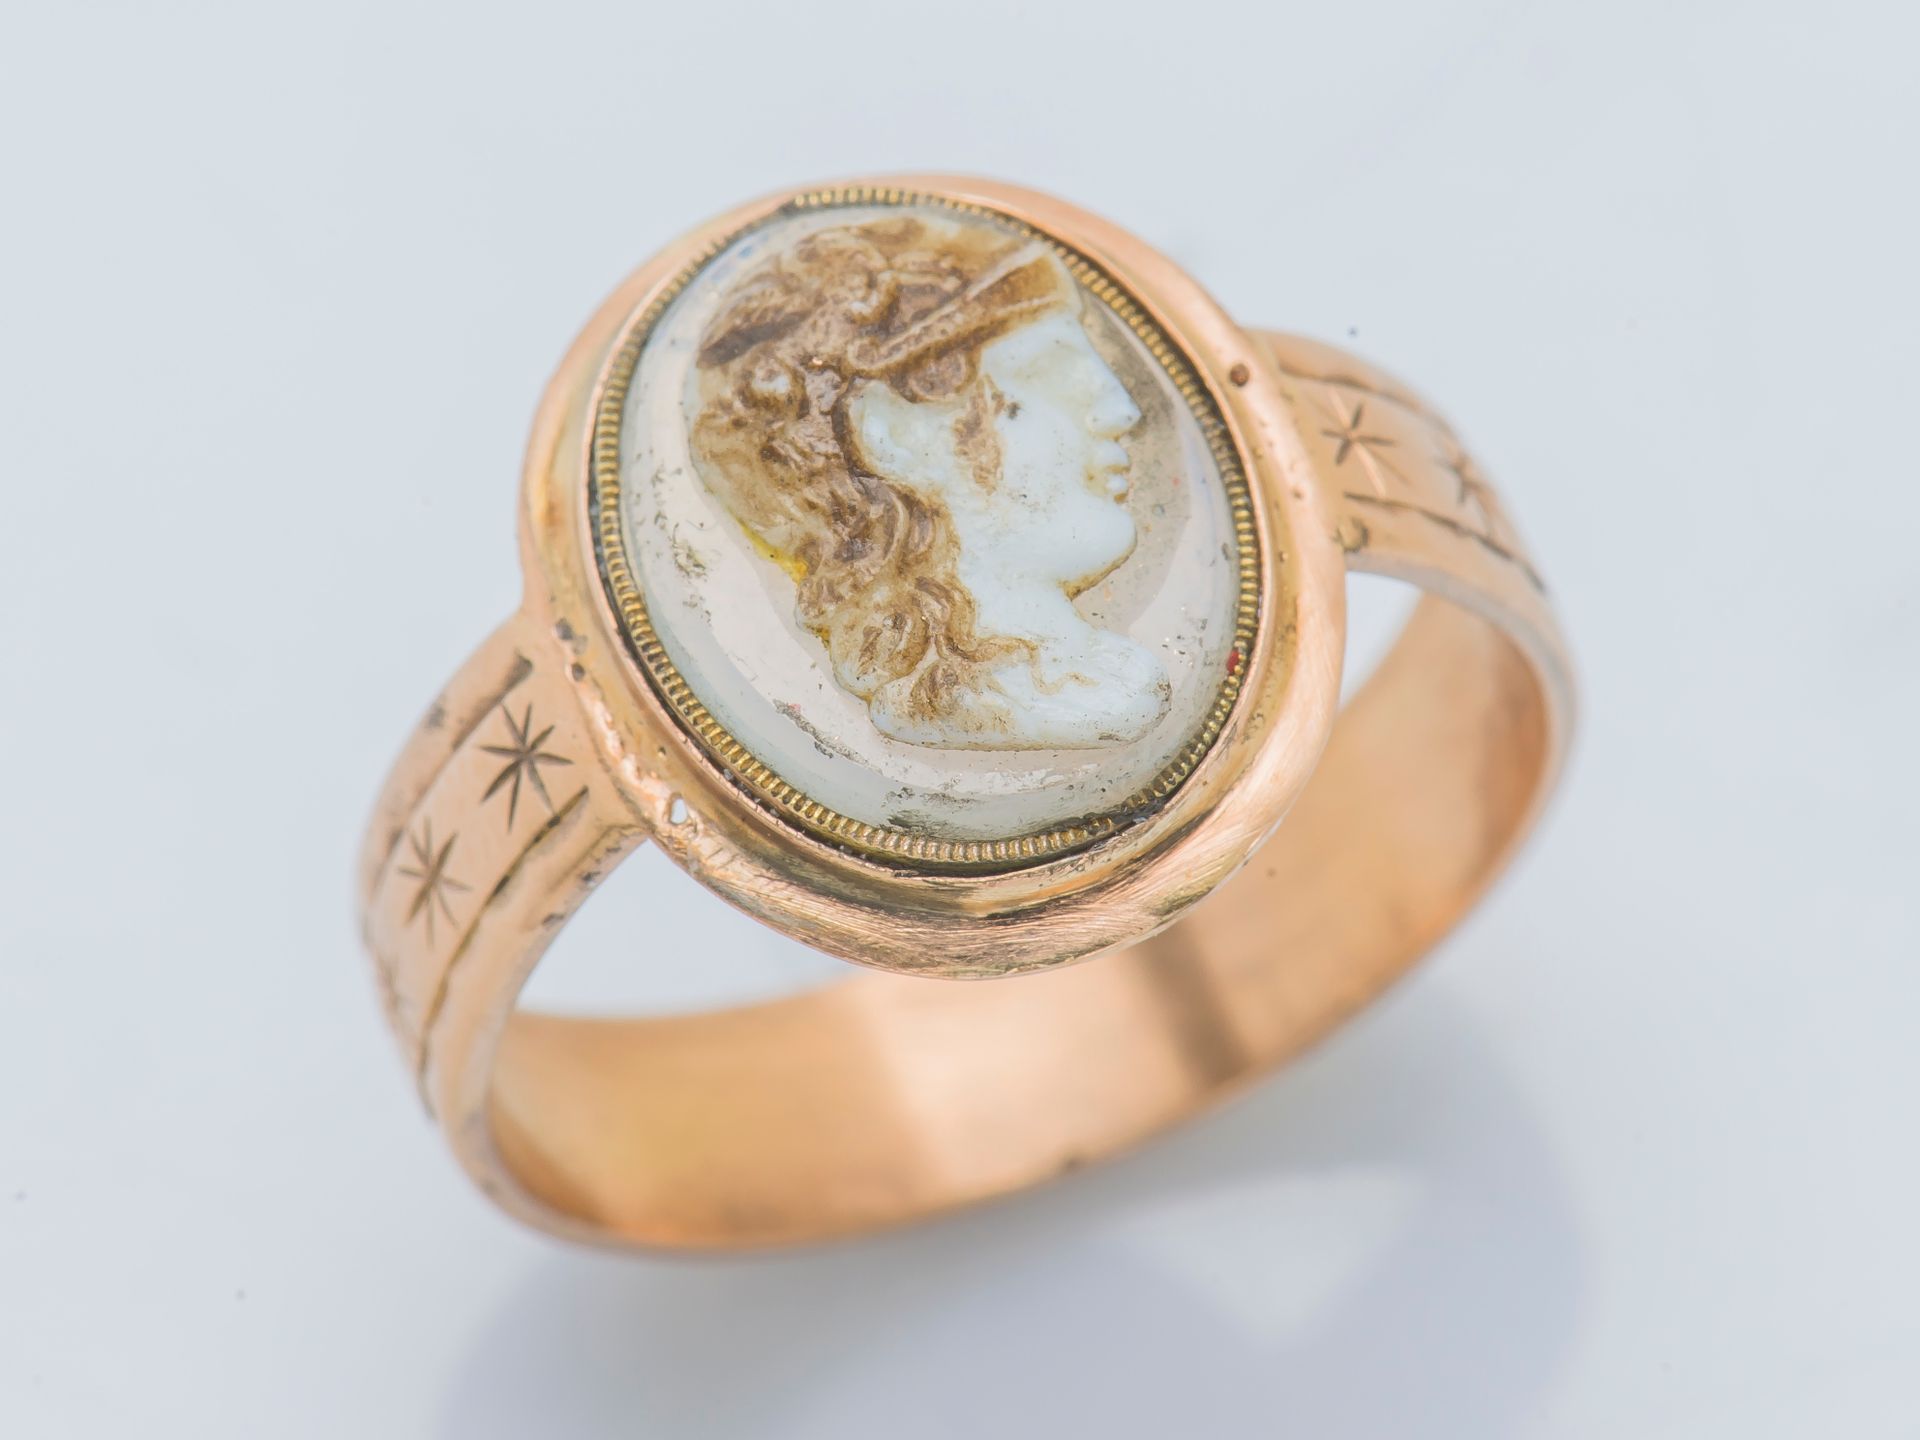 Null An 18K yellow gold ring (750 ‰) set with a cameo on agate depicting a profi&hellip;